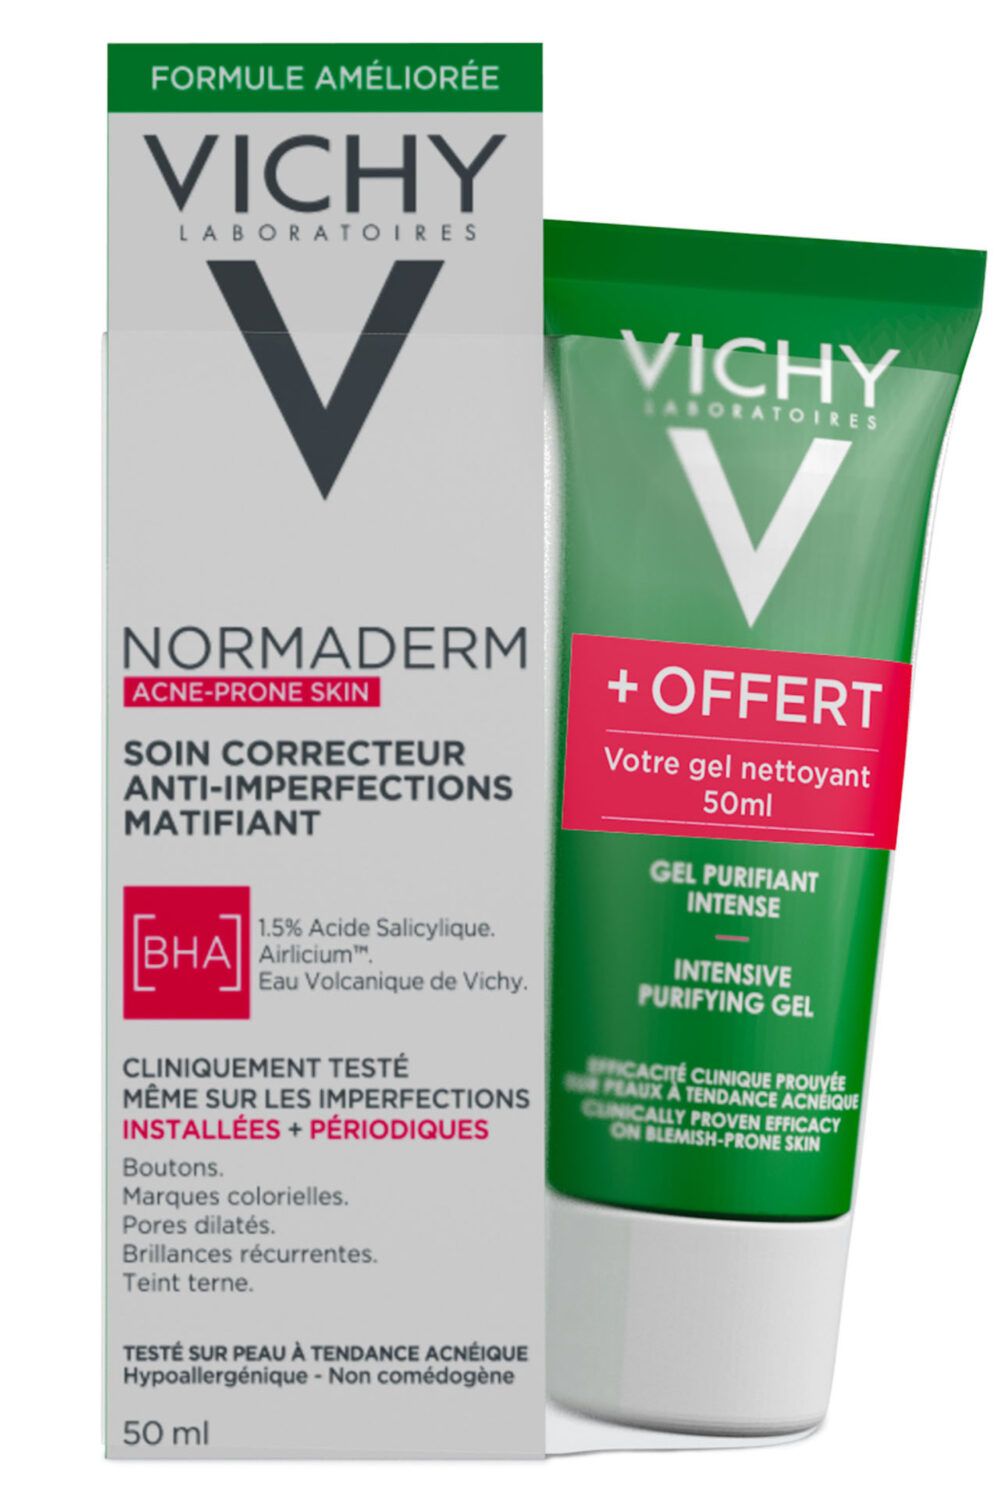 Vichy - Soin correcteur anti-imperfections Normaderm